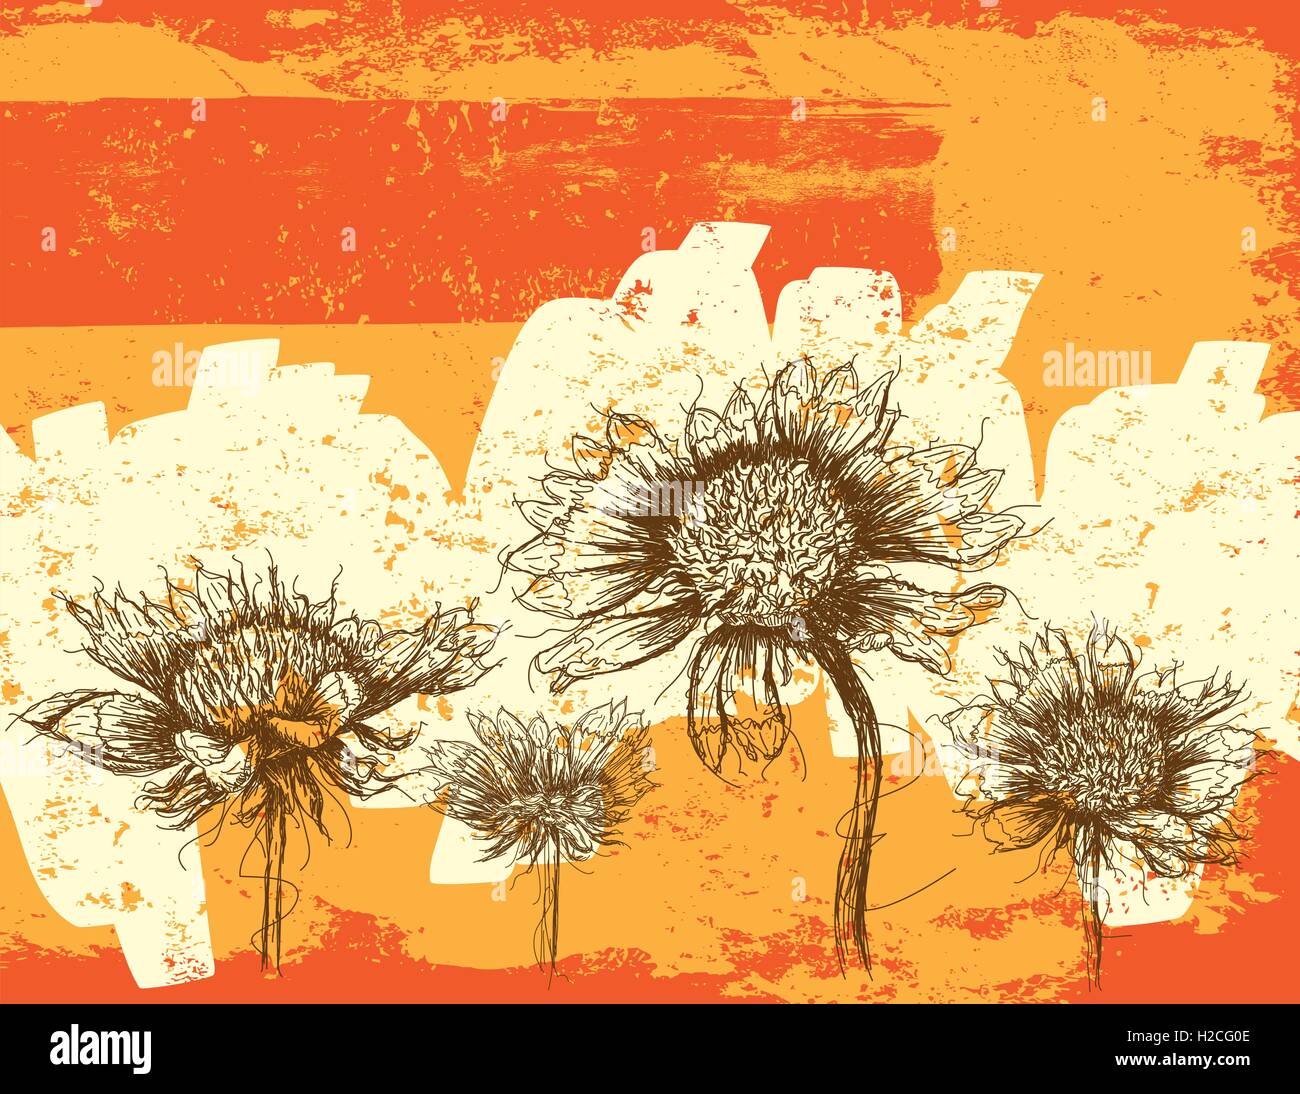 Wildflowers Abstract Wildflowers over an abstract background. Stock Vector